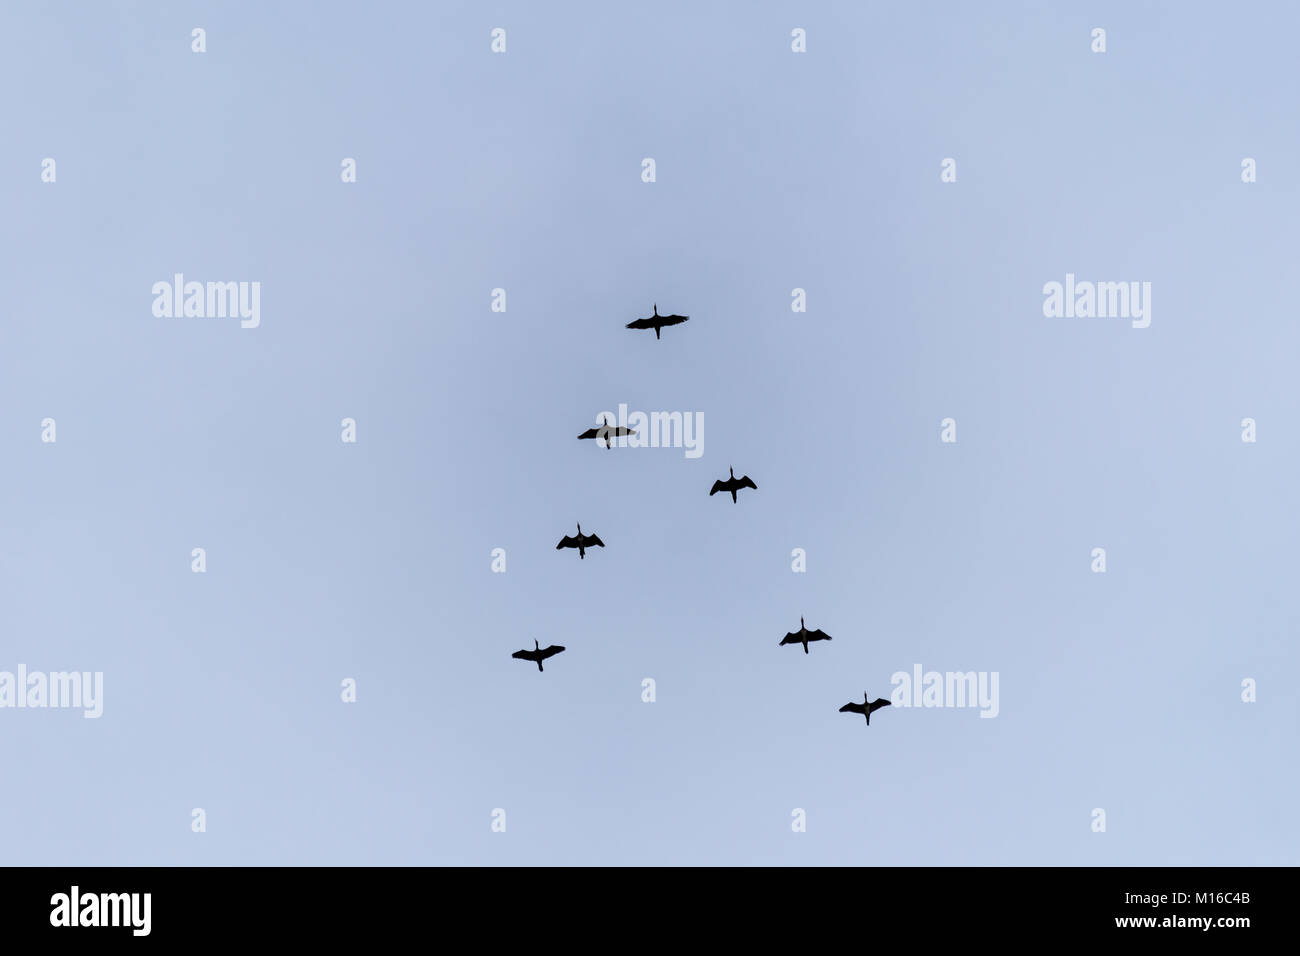 Flying birds on the sky. Black silhouettes and shapes against the bright sky. Migration of birds on the fall. Stock Photo